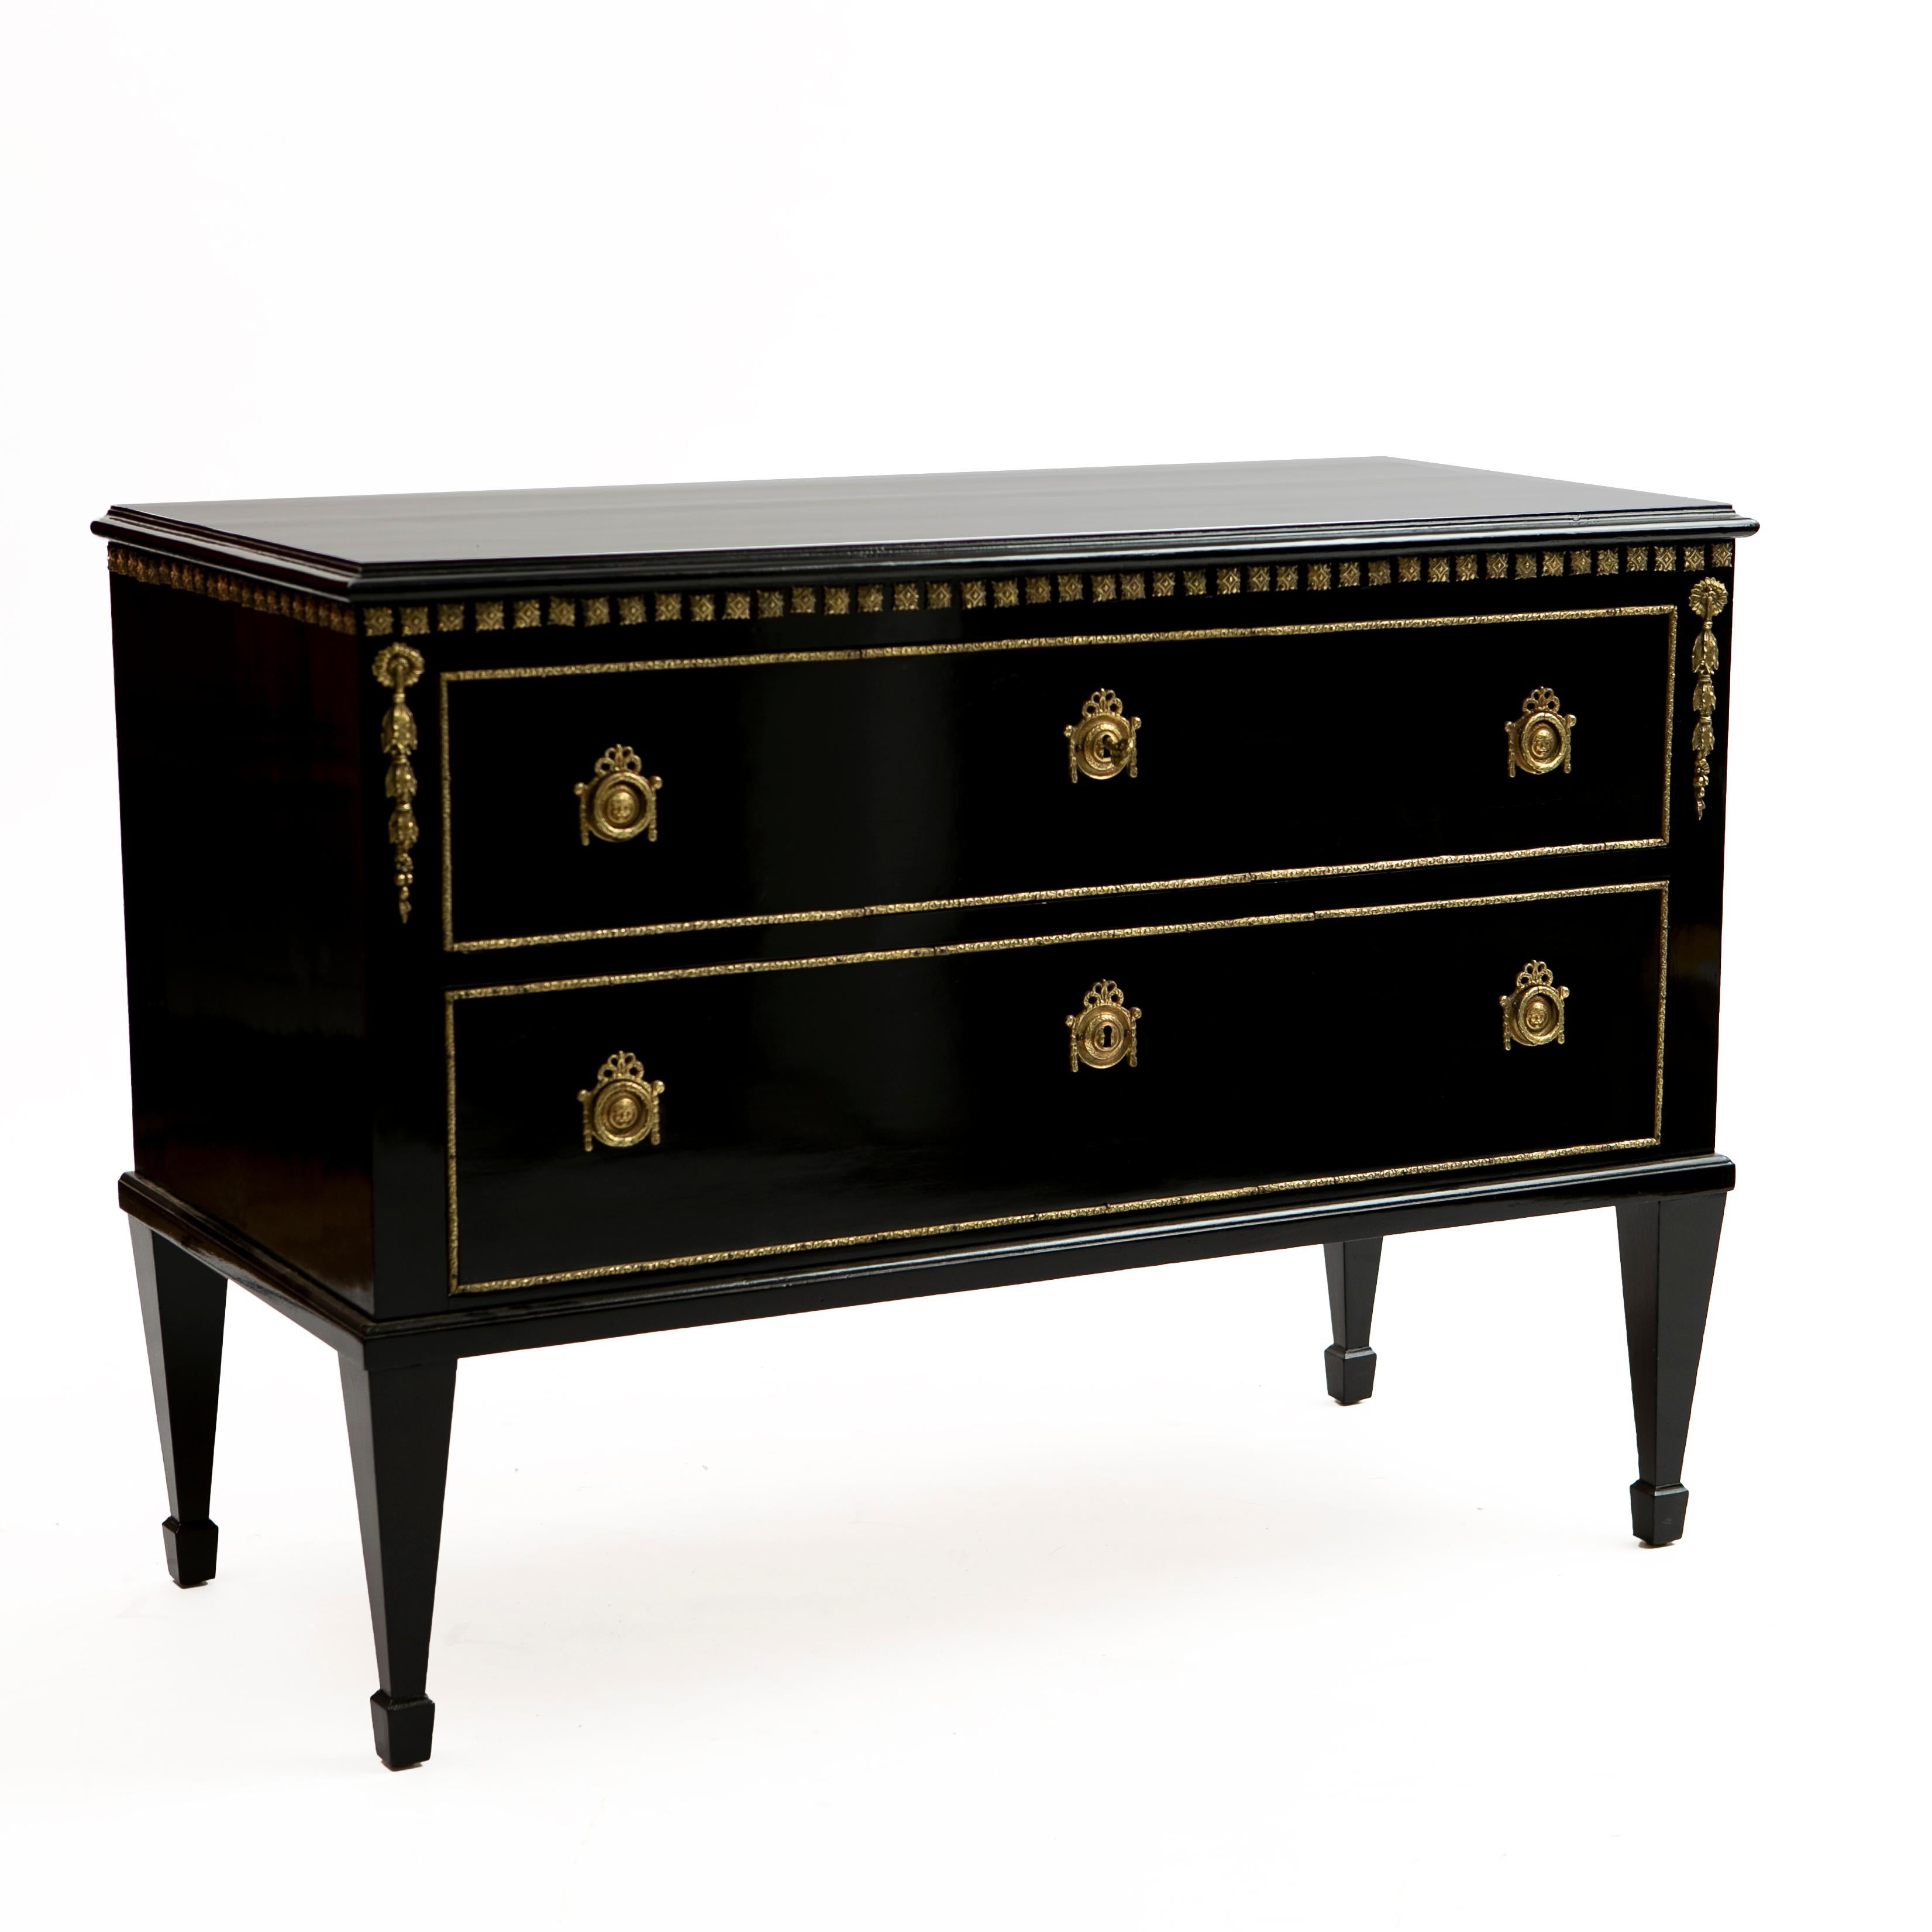 Decorative French commode with two drawers in the Directoire manner.

Black polished mahogany with bronze detailing and fitted with bronze ring pulls and key guards. Raised by square tapered legs.

France approx. 1900.